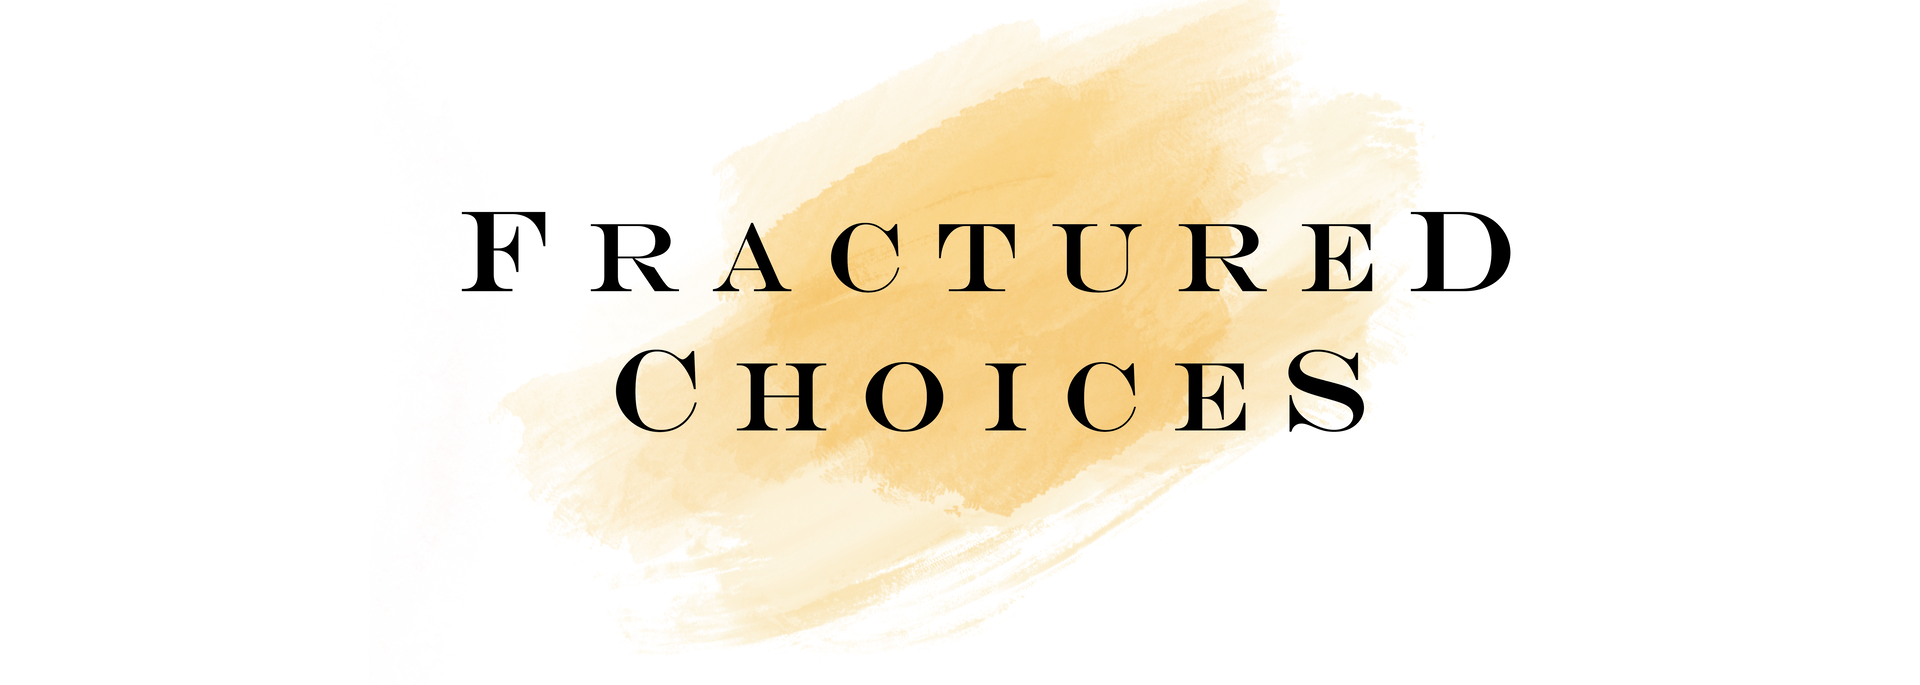 Fractured Choices